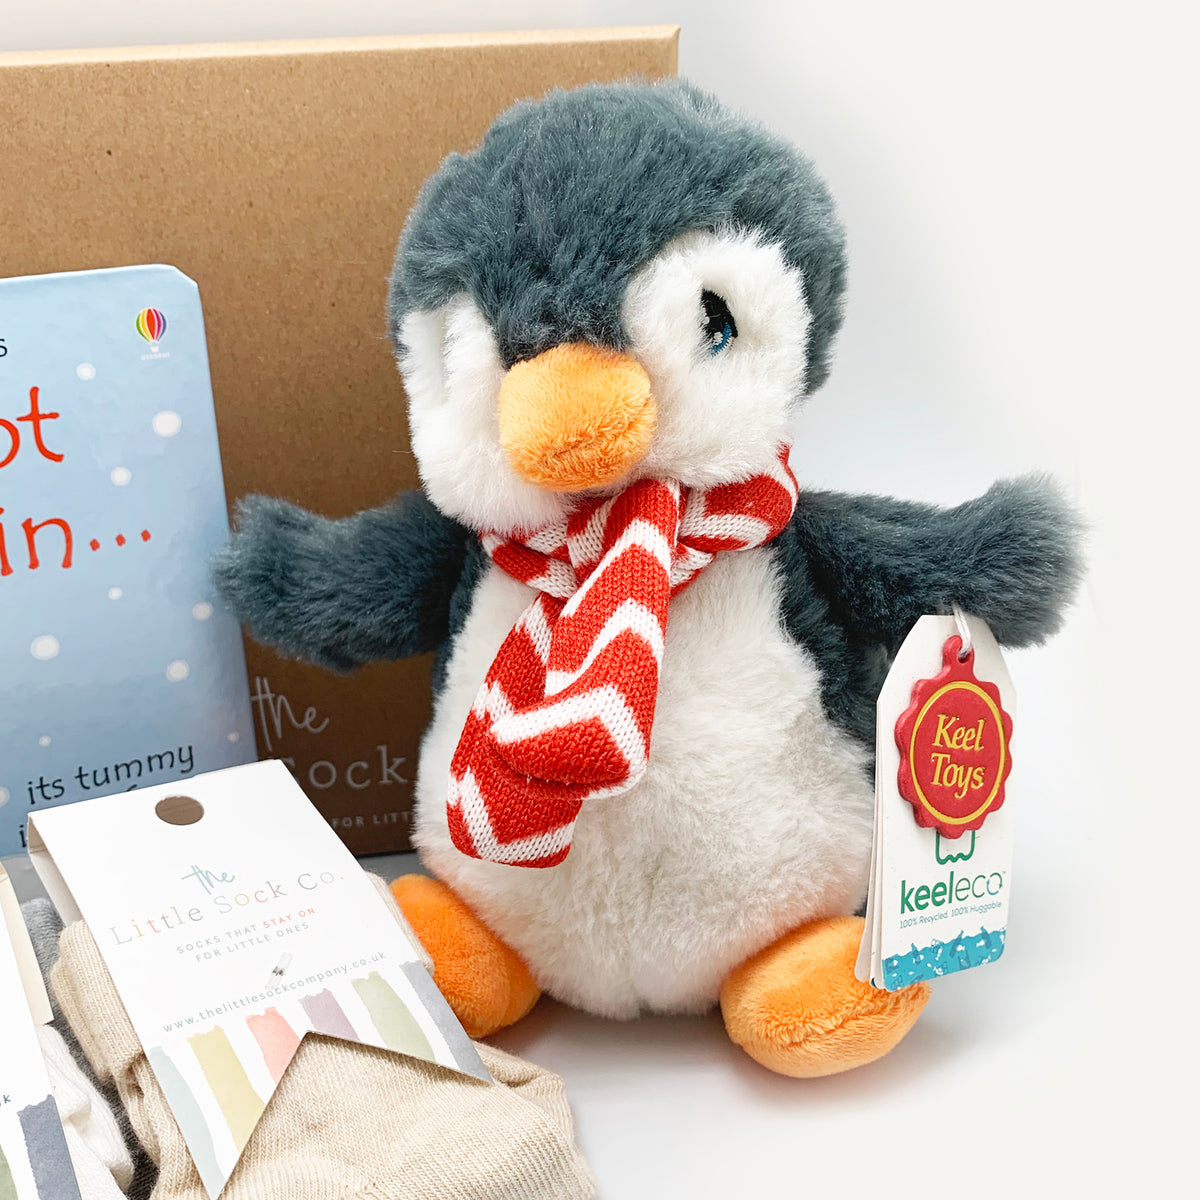 That's Not my Penguin Baby and Toddler Christmas Gift Set